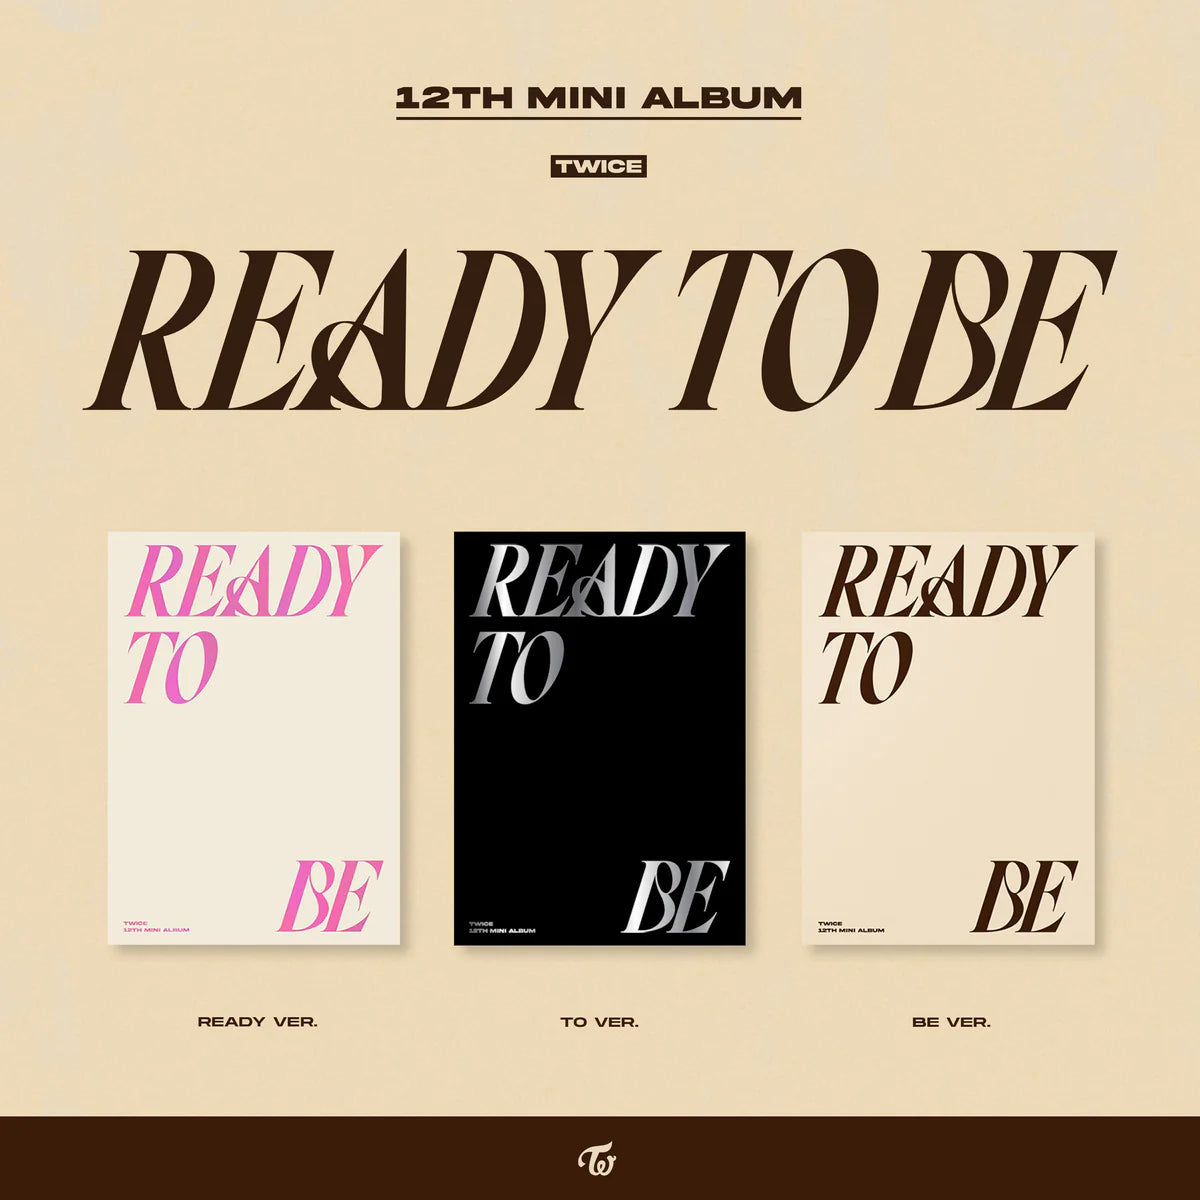 TWICE - Ready To Be (12th Mini Album) (3 Versions) (Preorder Photocard set + Poster included)